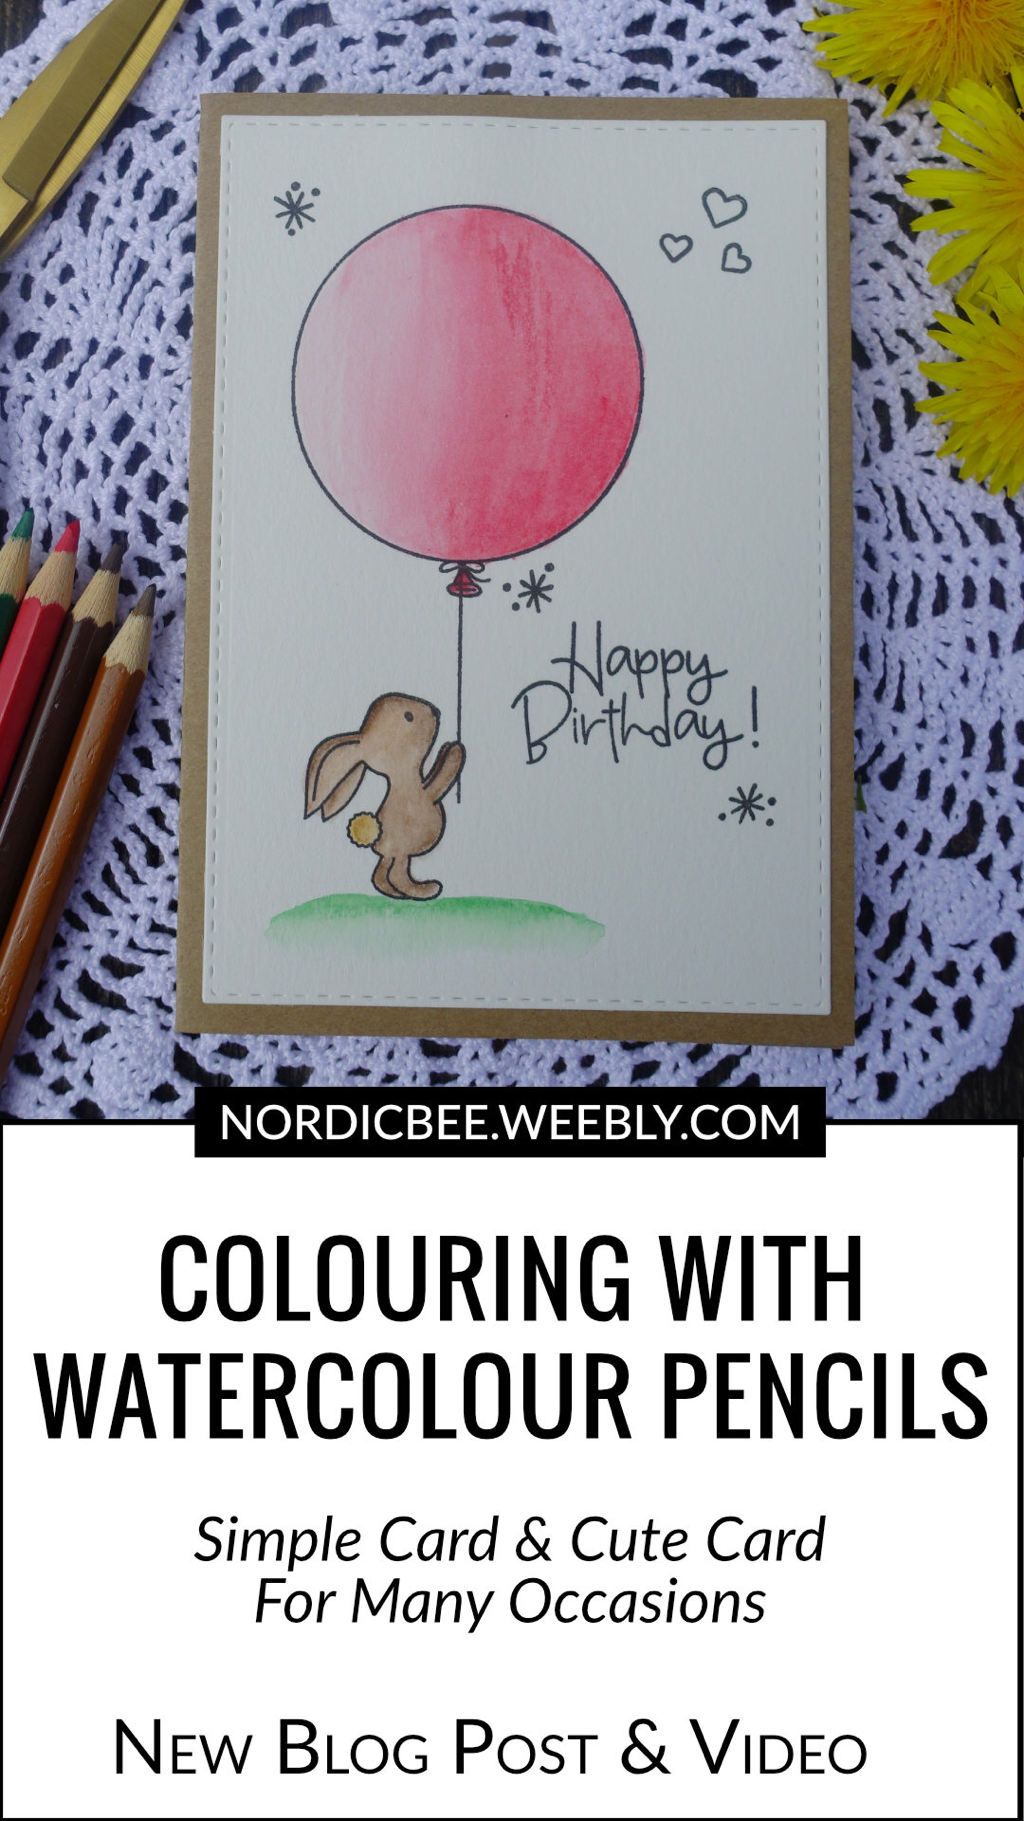 Happy Birthday card with a bunny holding a balloon. Stamped using the stamp set from Avery Elle called Some Bunny and watercoloured using watercolouring pencils from Faber Castel. #watercolourpencils #simplewatercolouring #averyellesomebunny